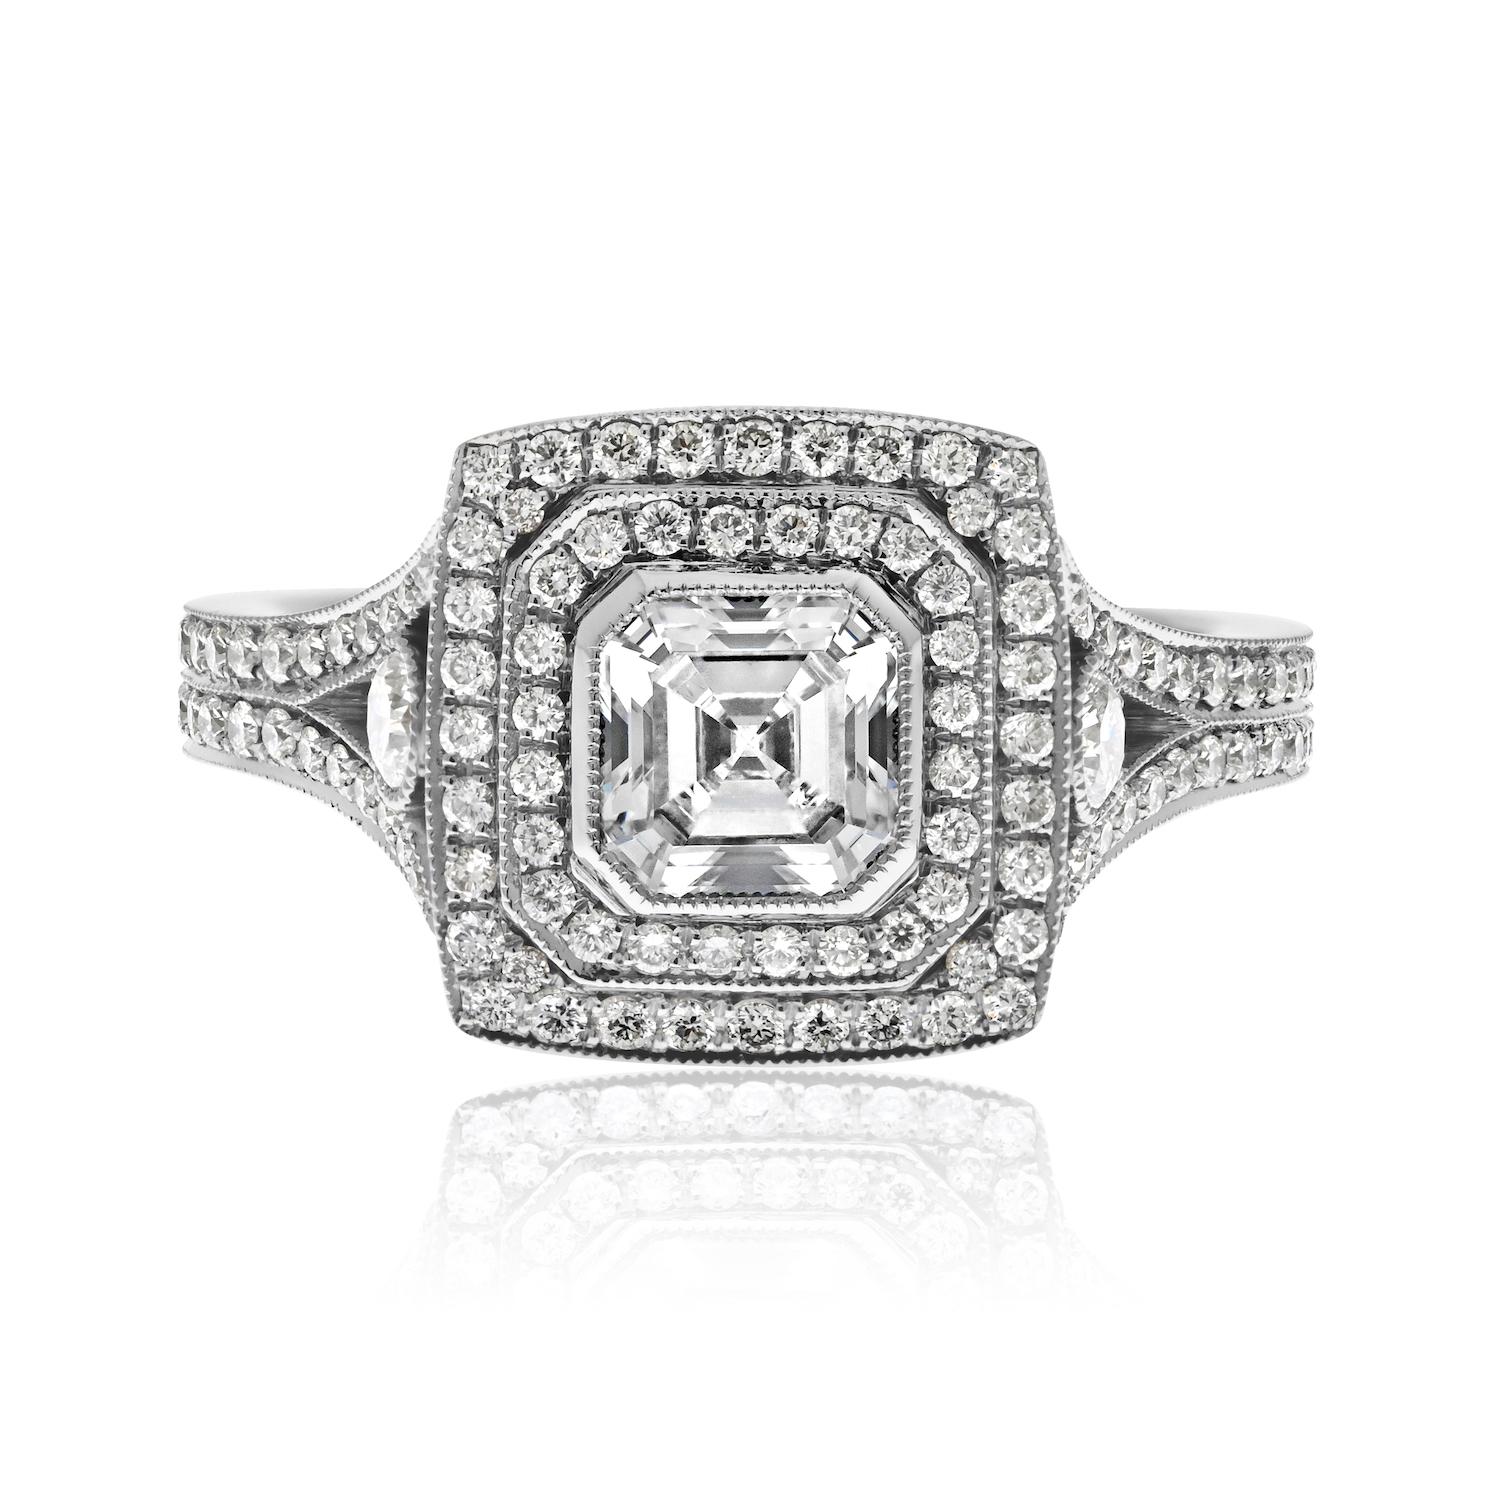 The handmade ring features a magnificent Asscher cut diamond embraced by a double pave halo, elegantly mounted on a split shank. Let's delve into the details that make this ring a true gem.

**The Asscher Cut Diamond: A Gem of Distinction**

At the